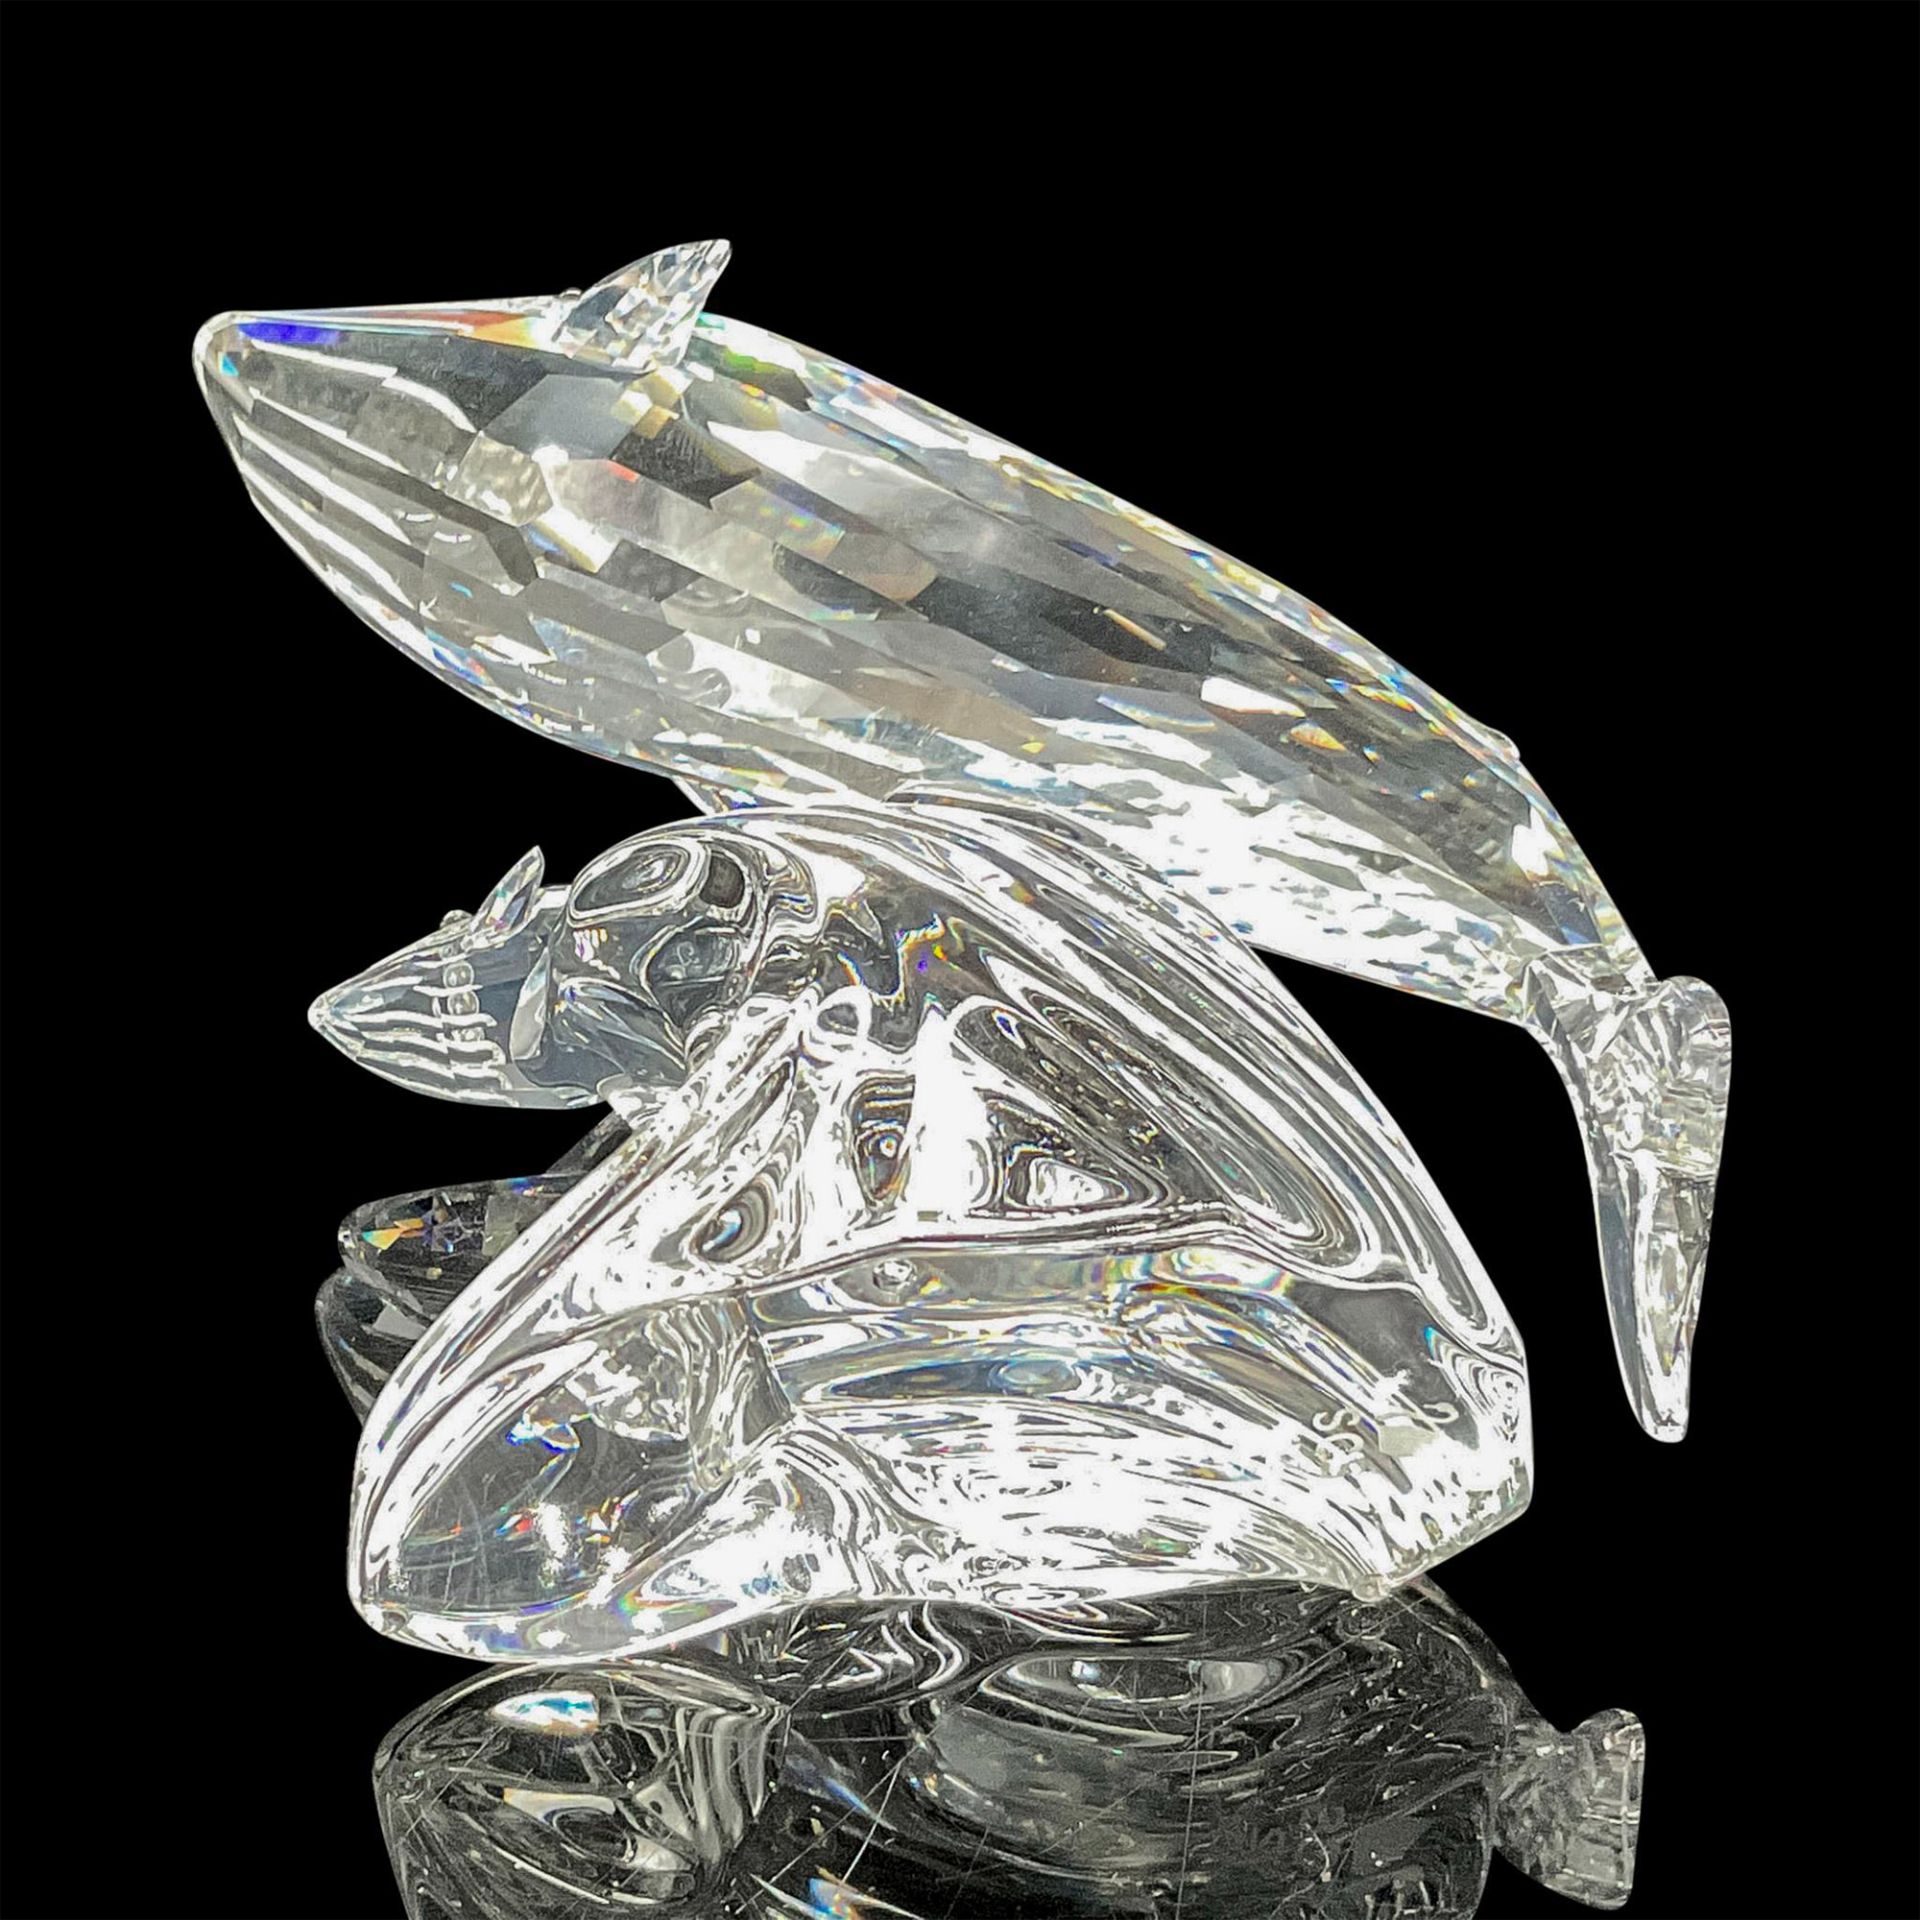 Swarovski Crystal Society Figurine, Care for Me The Whales - Image 3 of 4